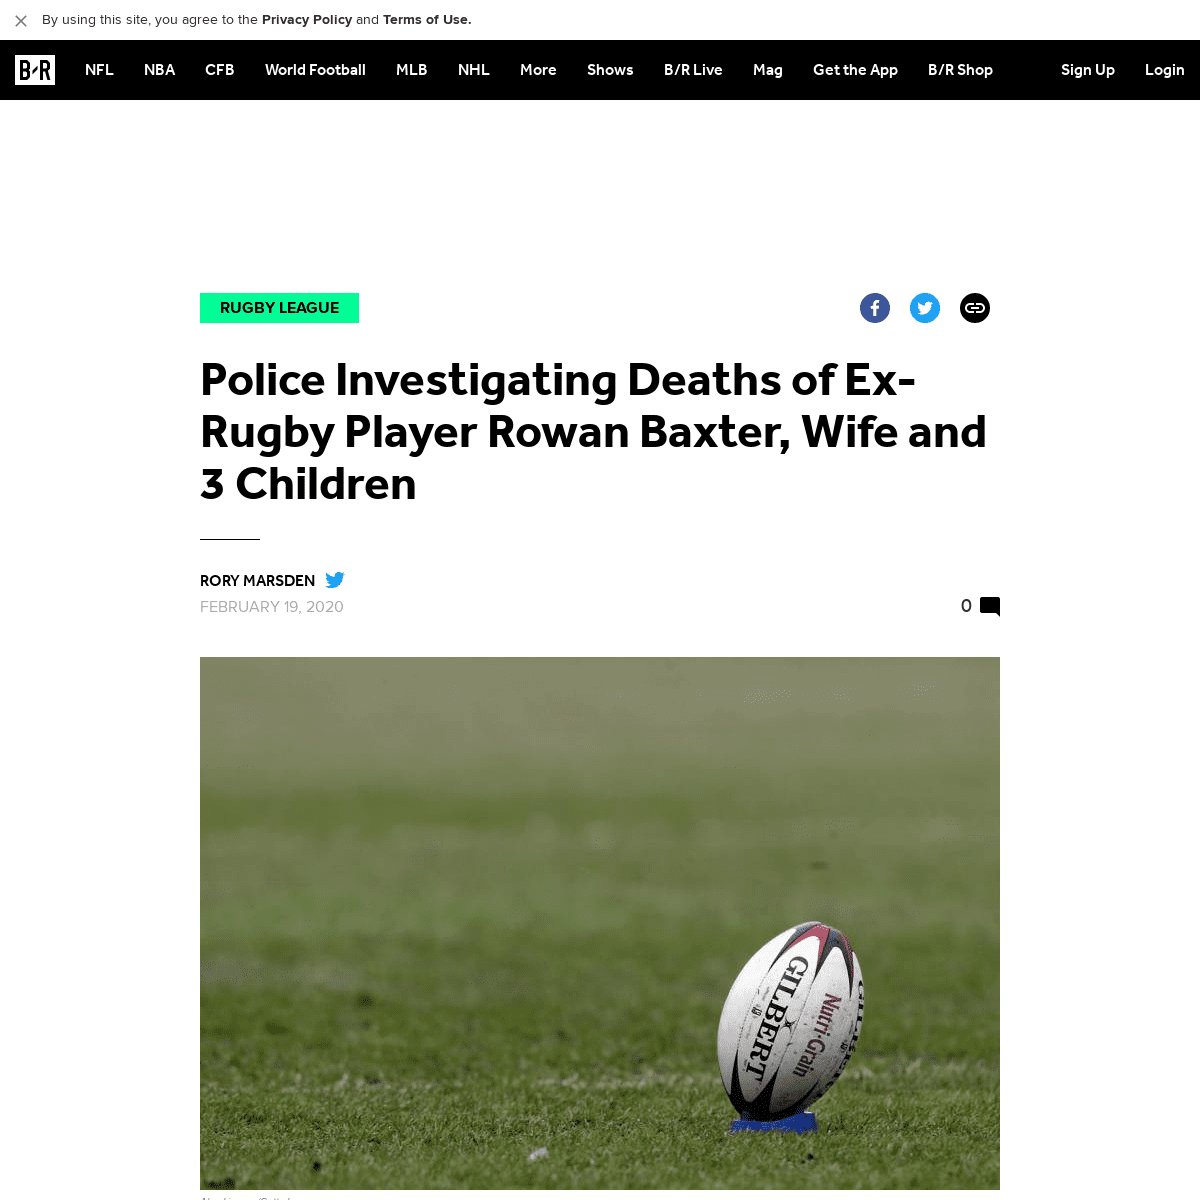 A complete backup of bleacherreport.com/articles/2877040-police-investigating-deaths-of-ex-rugby-player-rowan-baxter-wife-and-3-